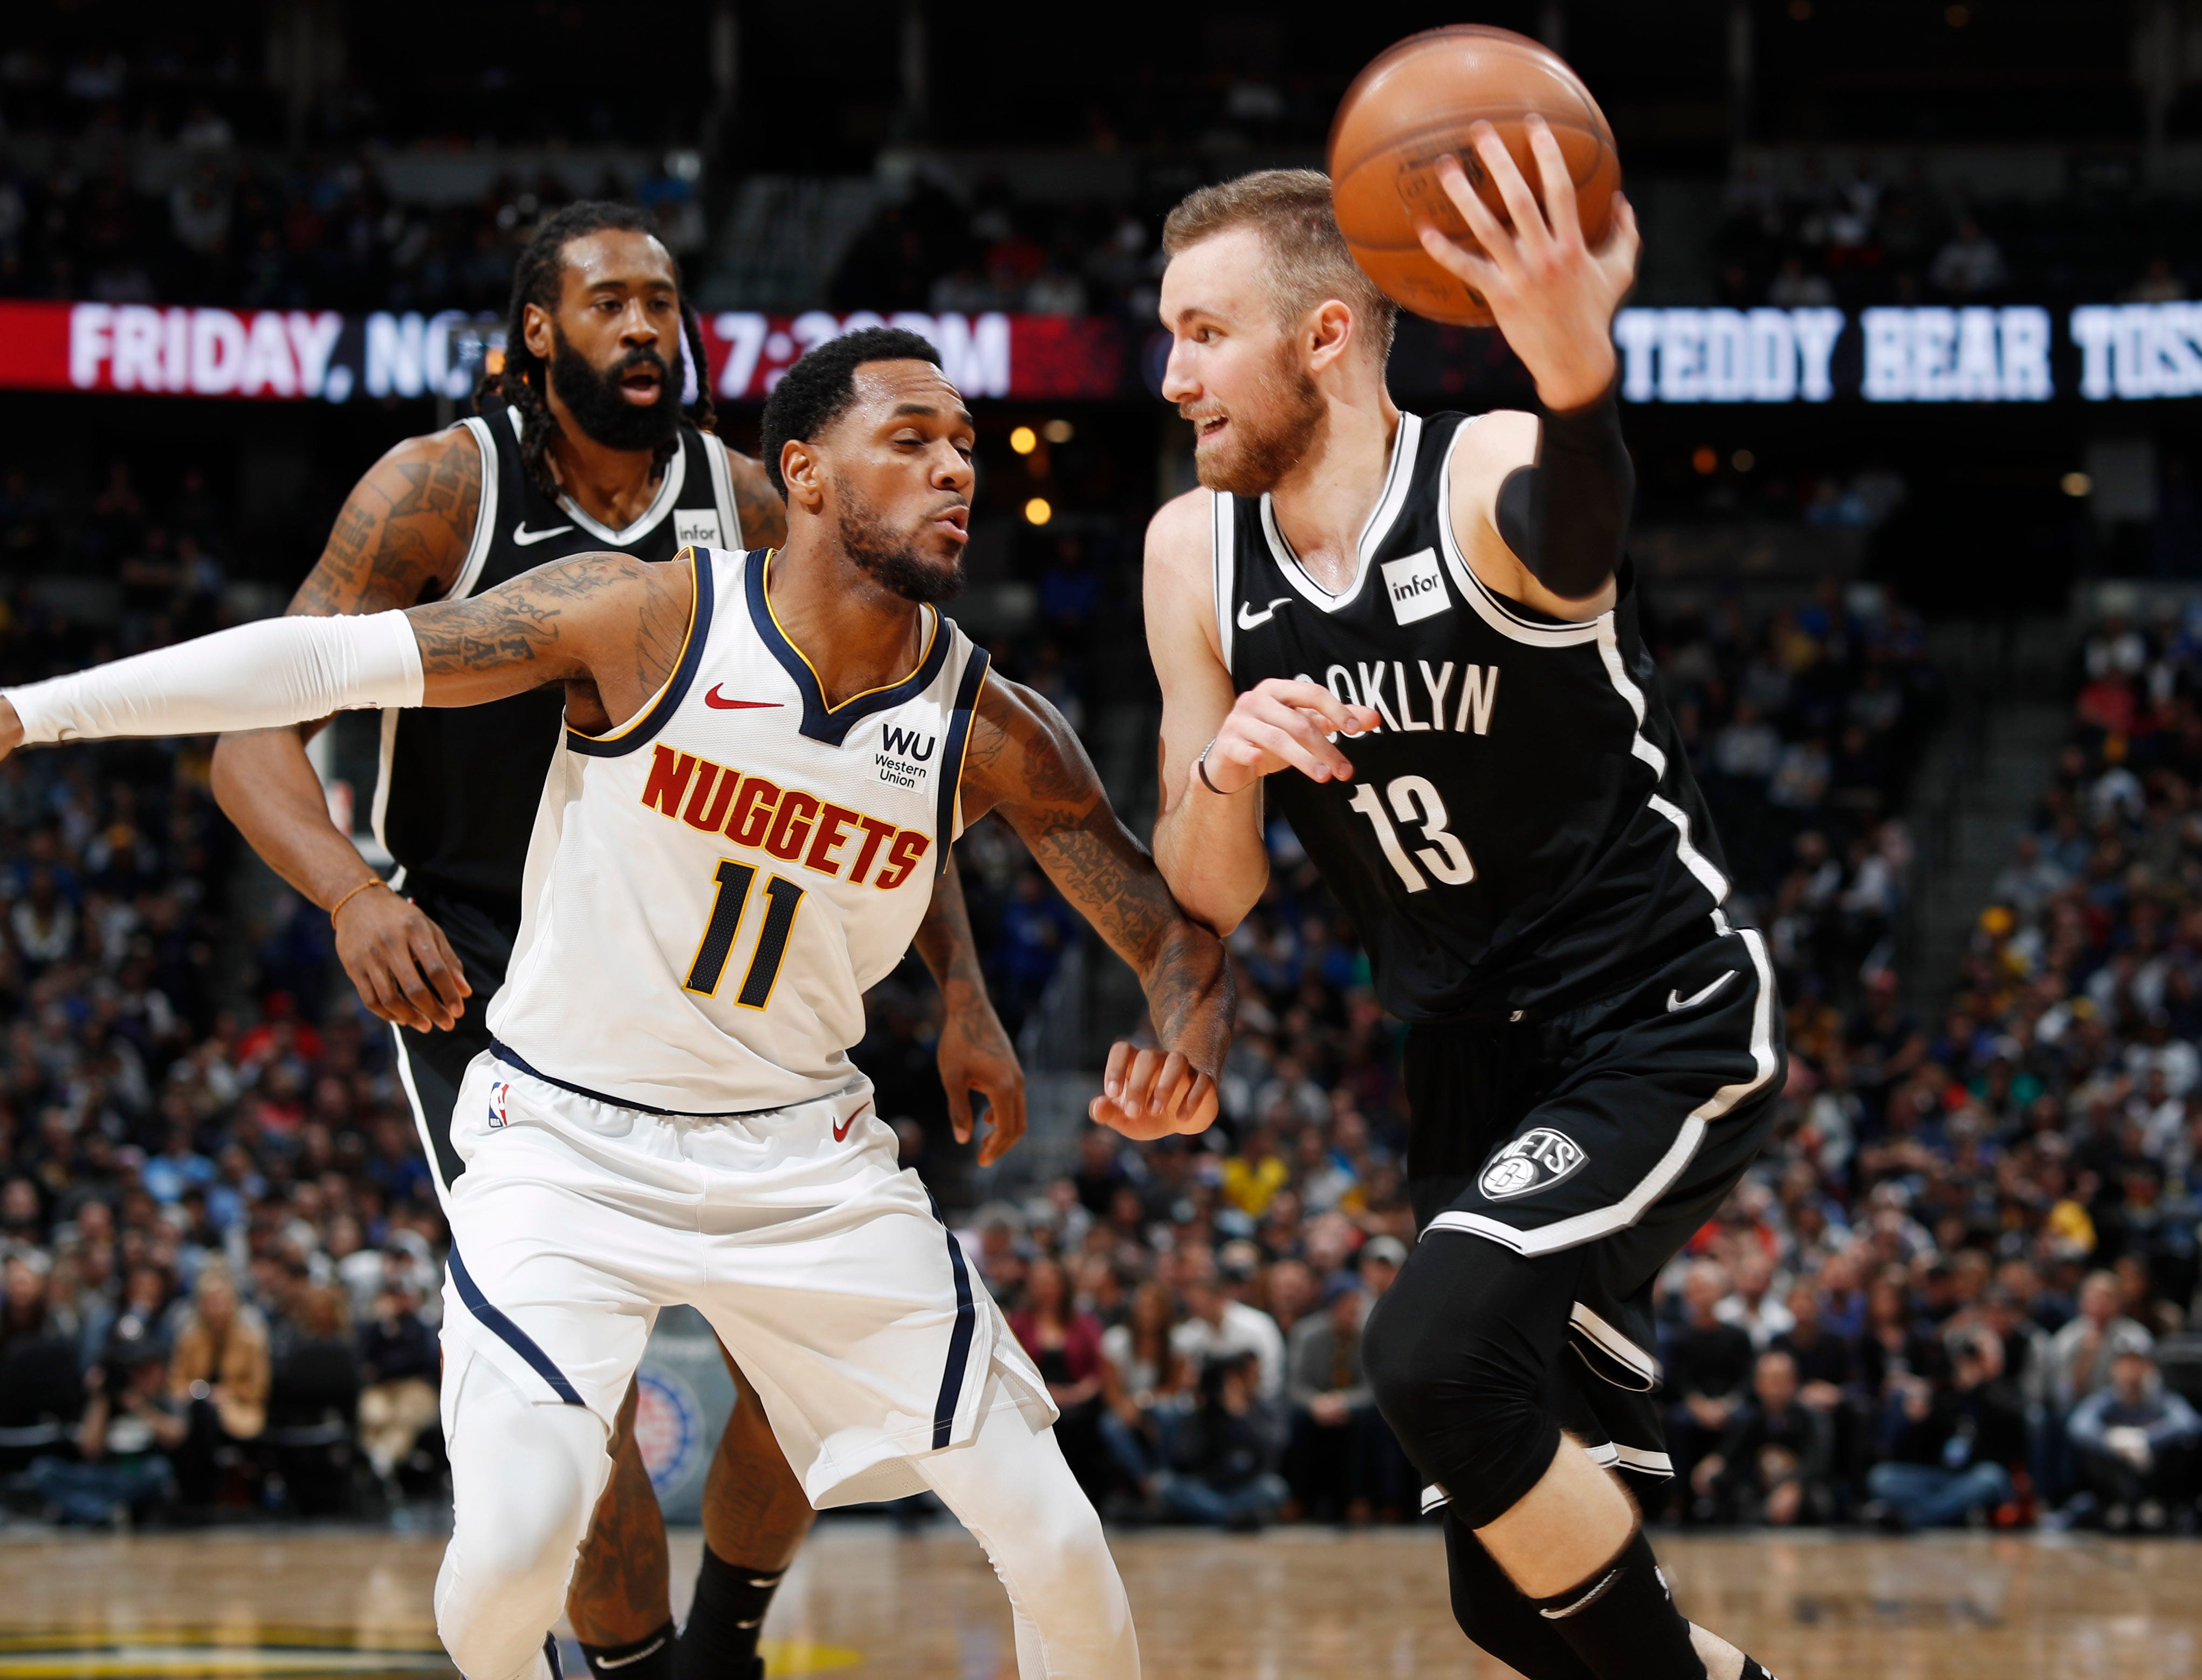 Brooklyn Nets guard Dzanan Musa, right, drives to the rim as Denver Nuggets guard Monte Morris defends in the second half of an NBA basketball game Thursday, Nov. 14, 2019 in Denver. The Nuggets won 101-93.